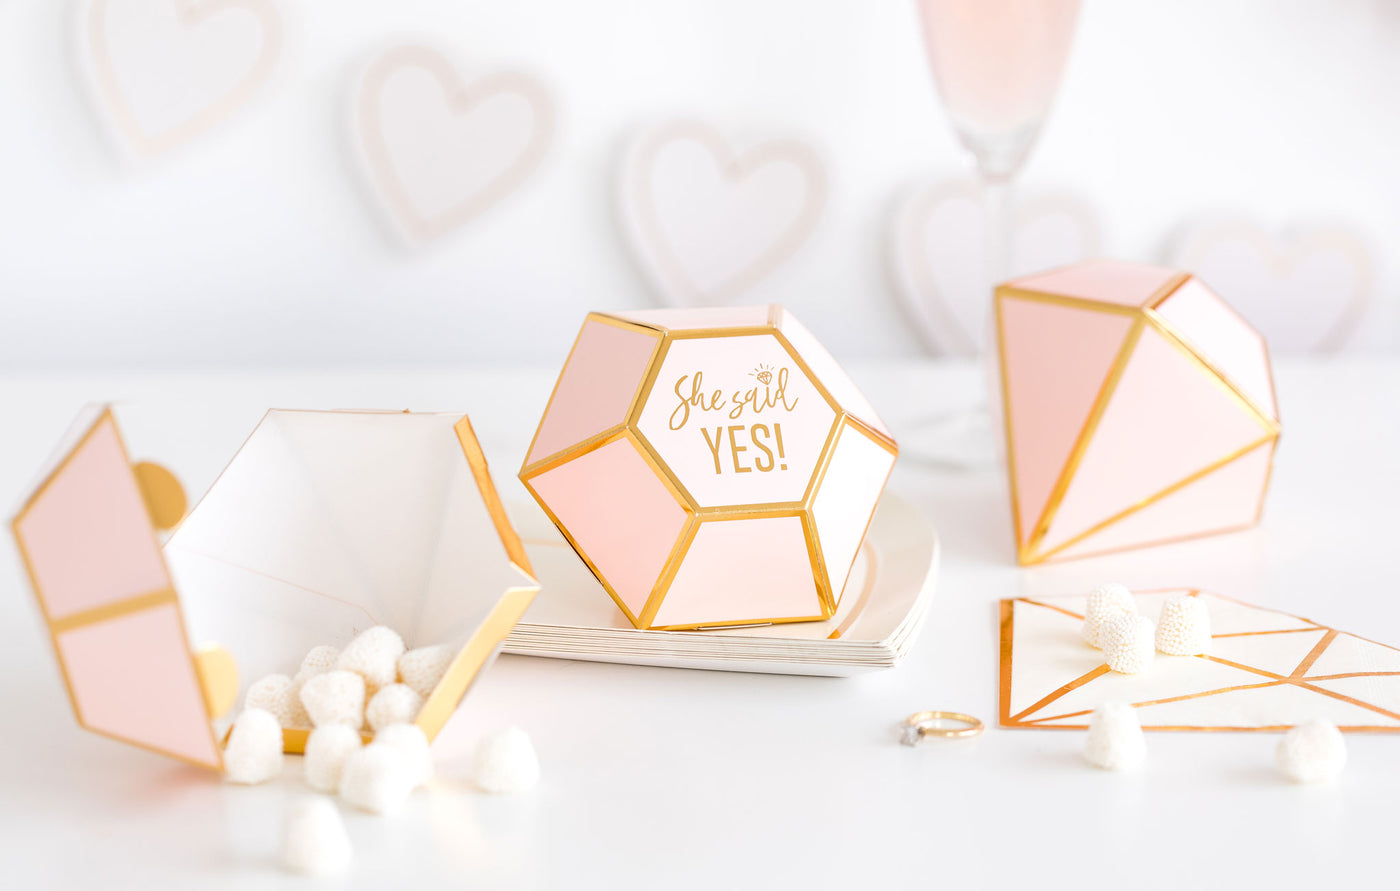 BTB715-Bride To Be Favor Boxes NO LONGER AVAILABLE